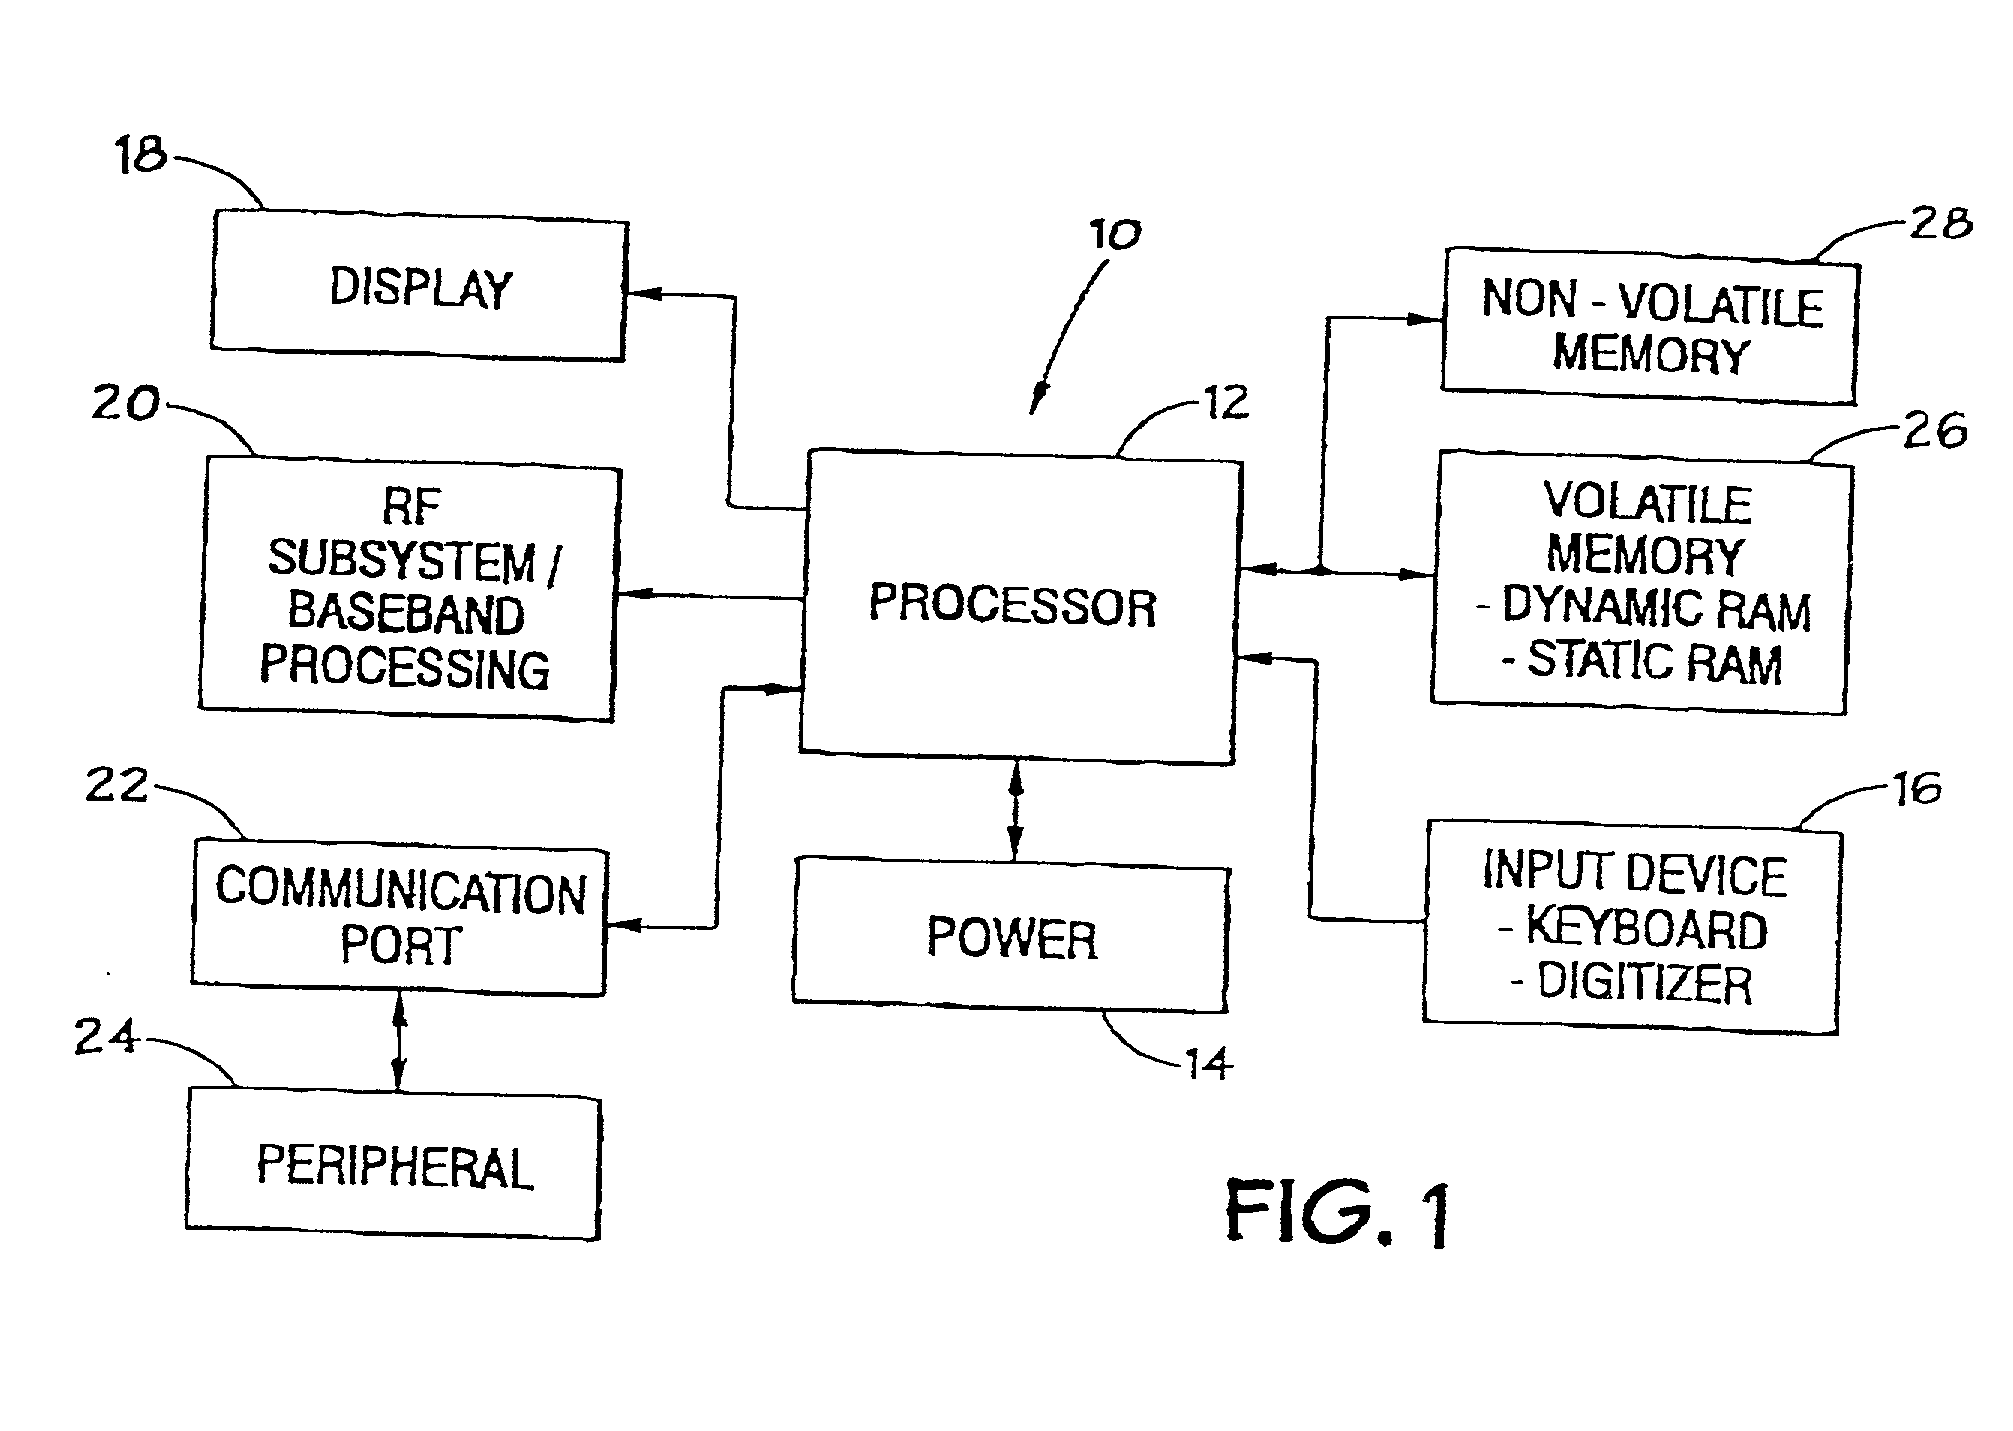 Duty cycle distortion compensation for the data output of a memory device